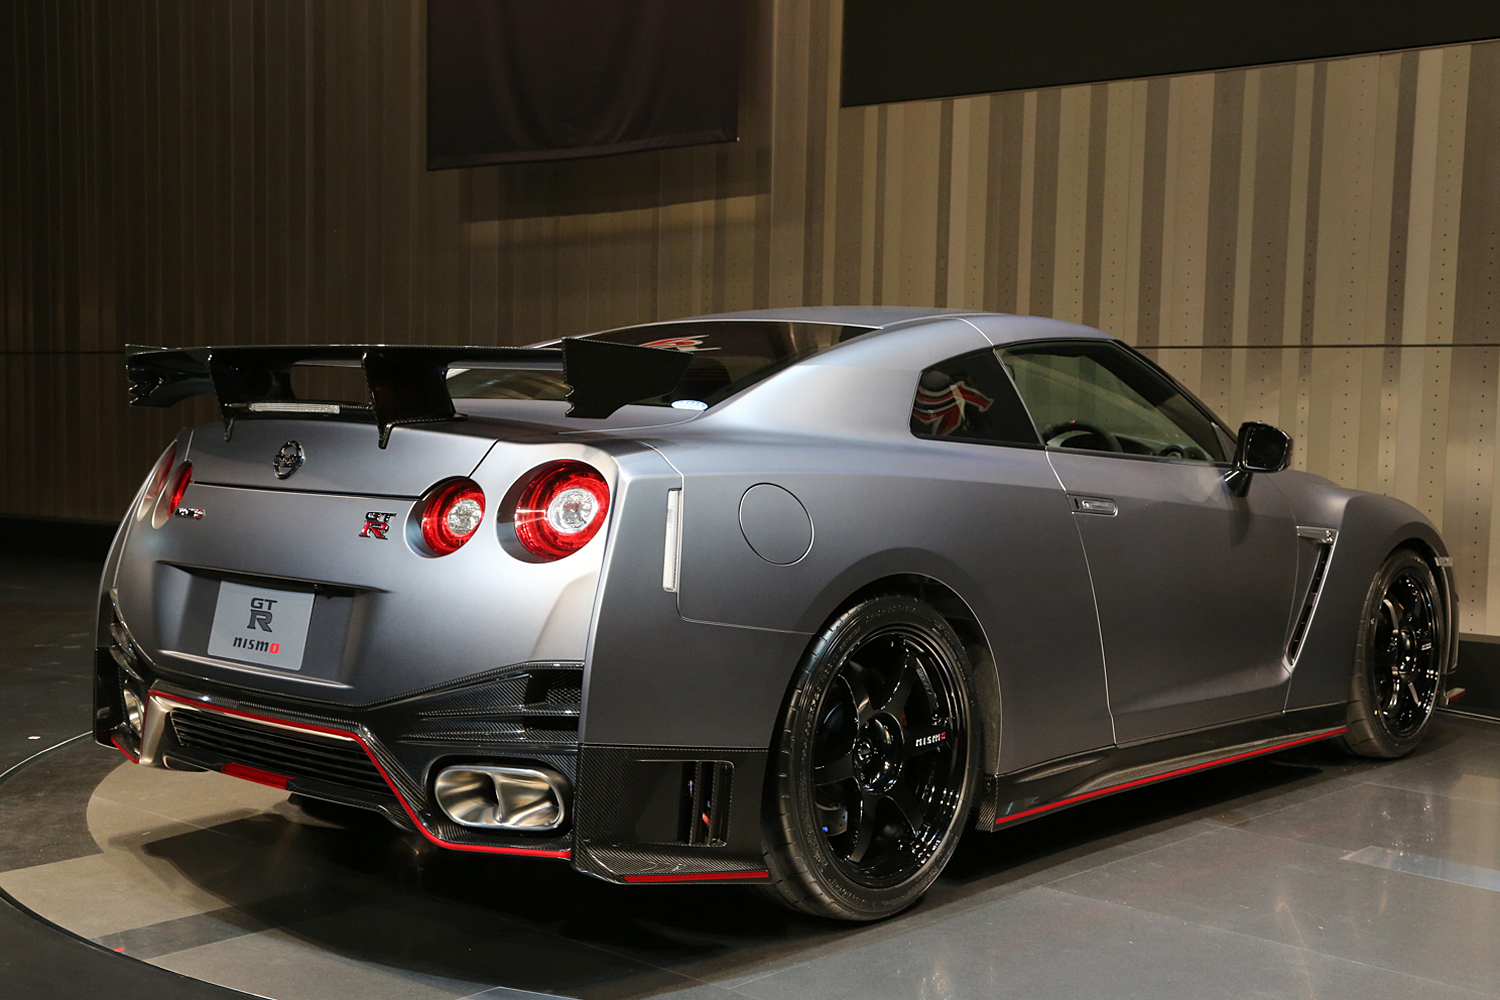 HQ Nissan GT-R Nismo Wallpapers | File 976.13Kb